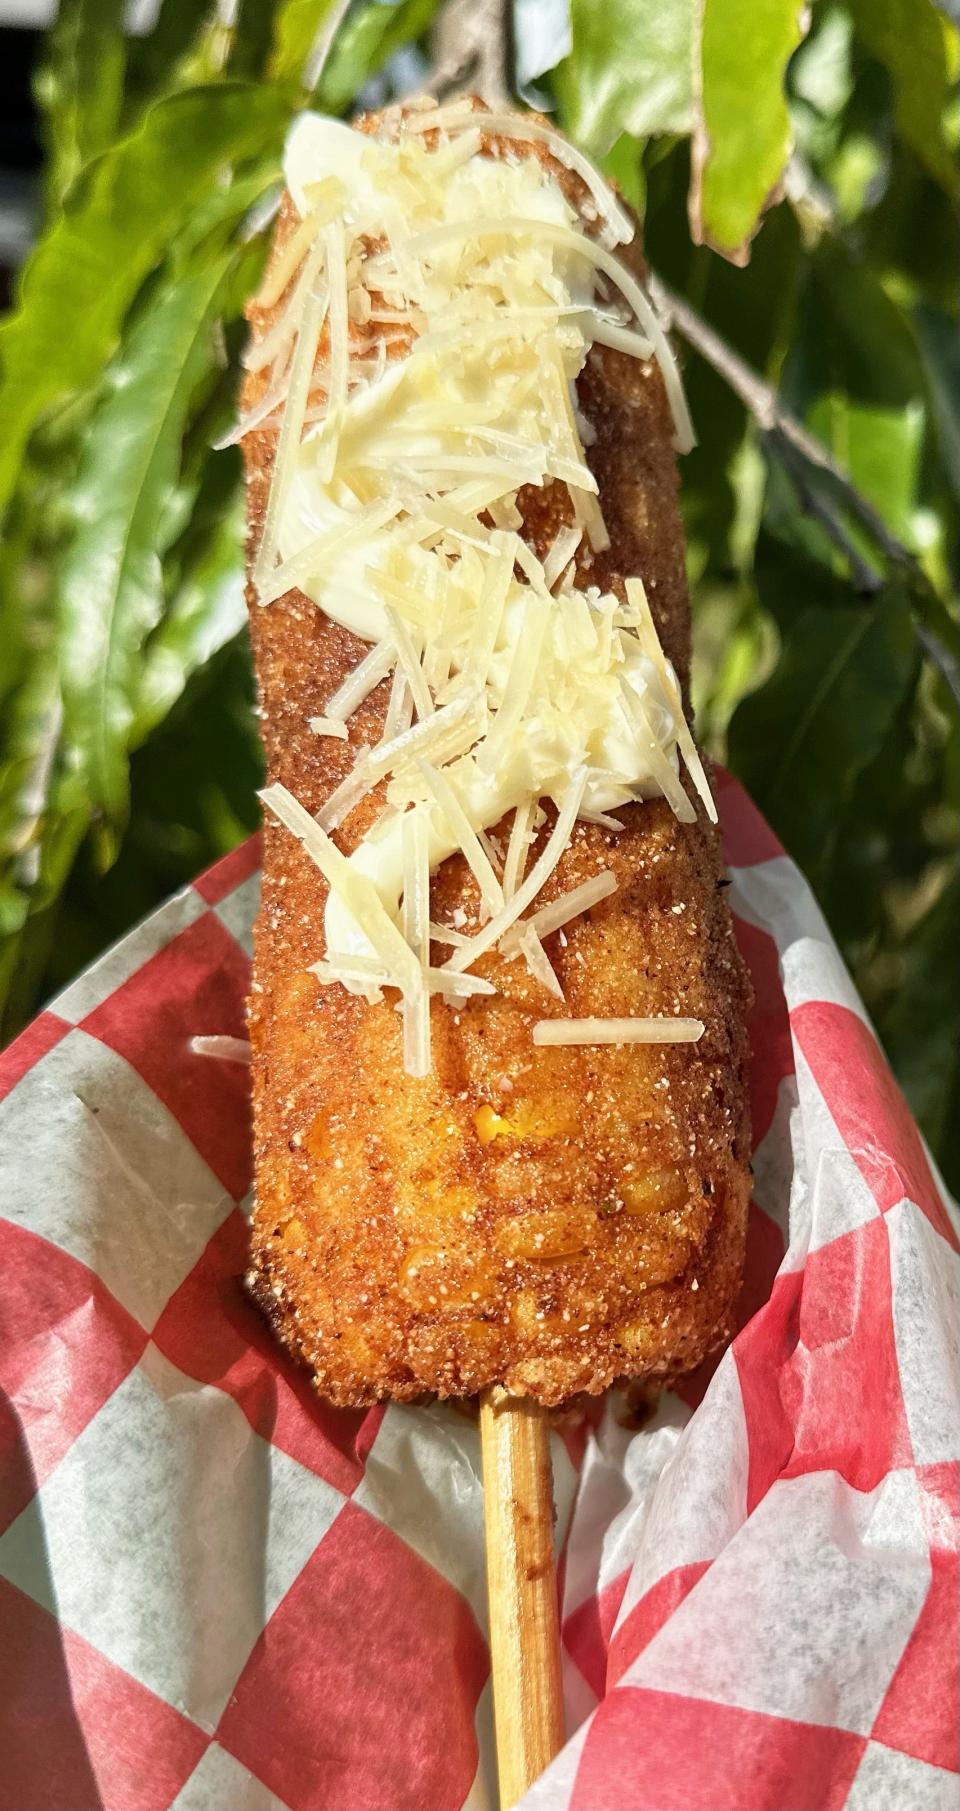 Deep-fried corn on a stick, a seasoned ear of corn dipped in buttermilk and egg mixture, rolled in flour corn meal, deep fried and topped with mayonnaise and parmesan, is available at Cantina Louie's by Meatball Factory at the 2023 Indiana State Fair.